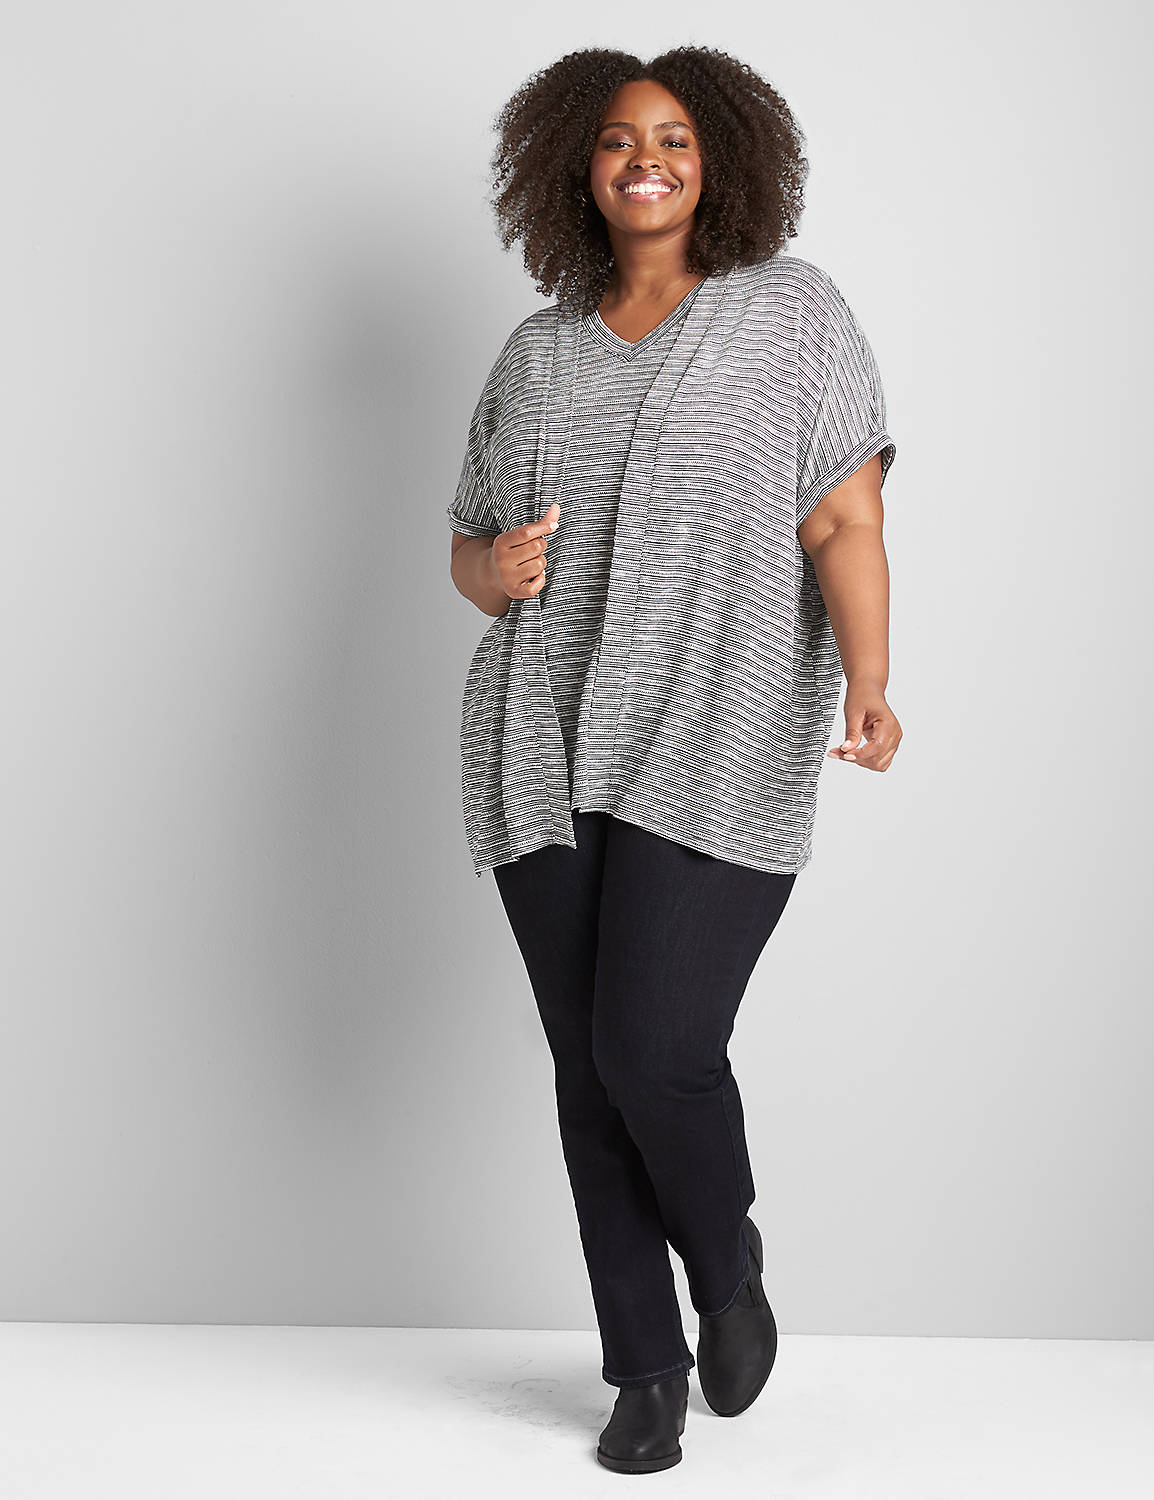 Cuffed Dolman-Sleeve Overpiece Product Image 3